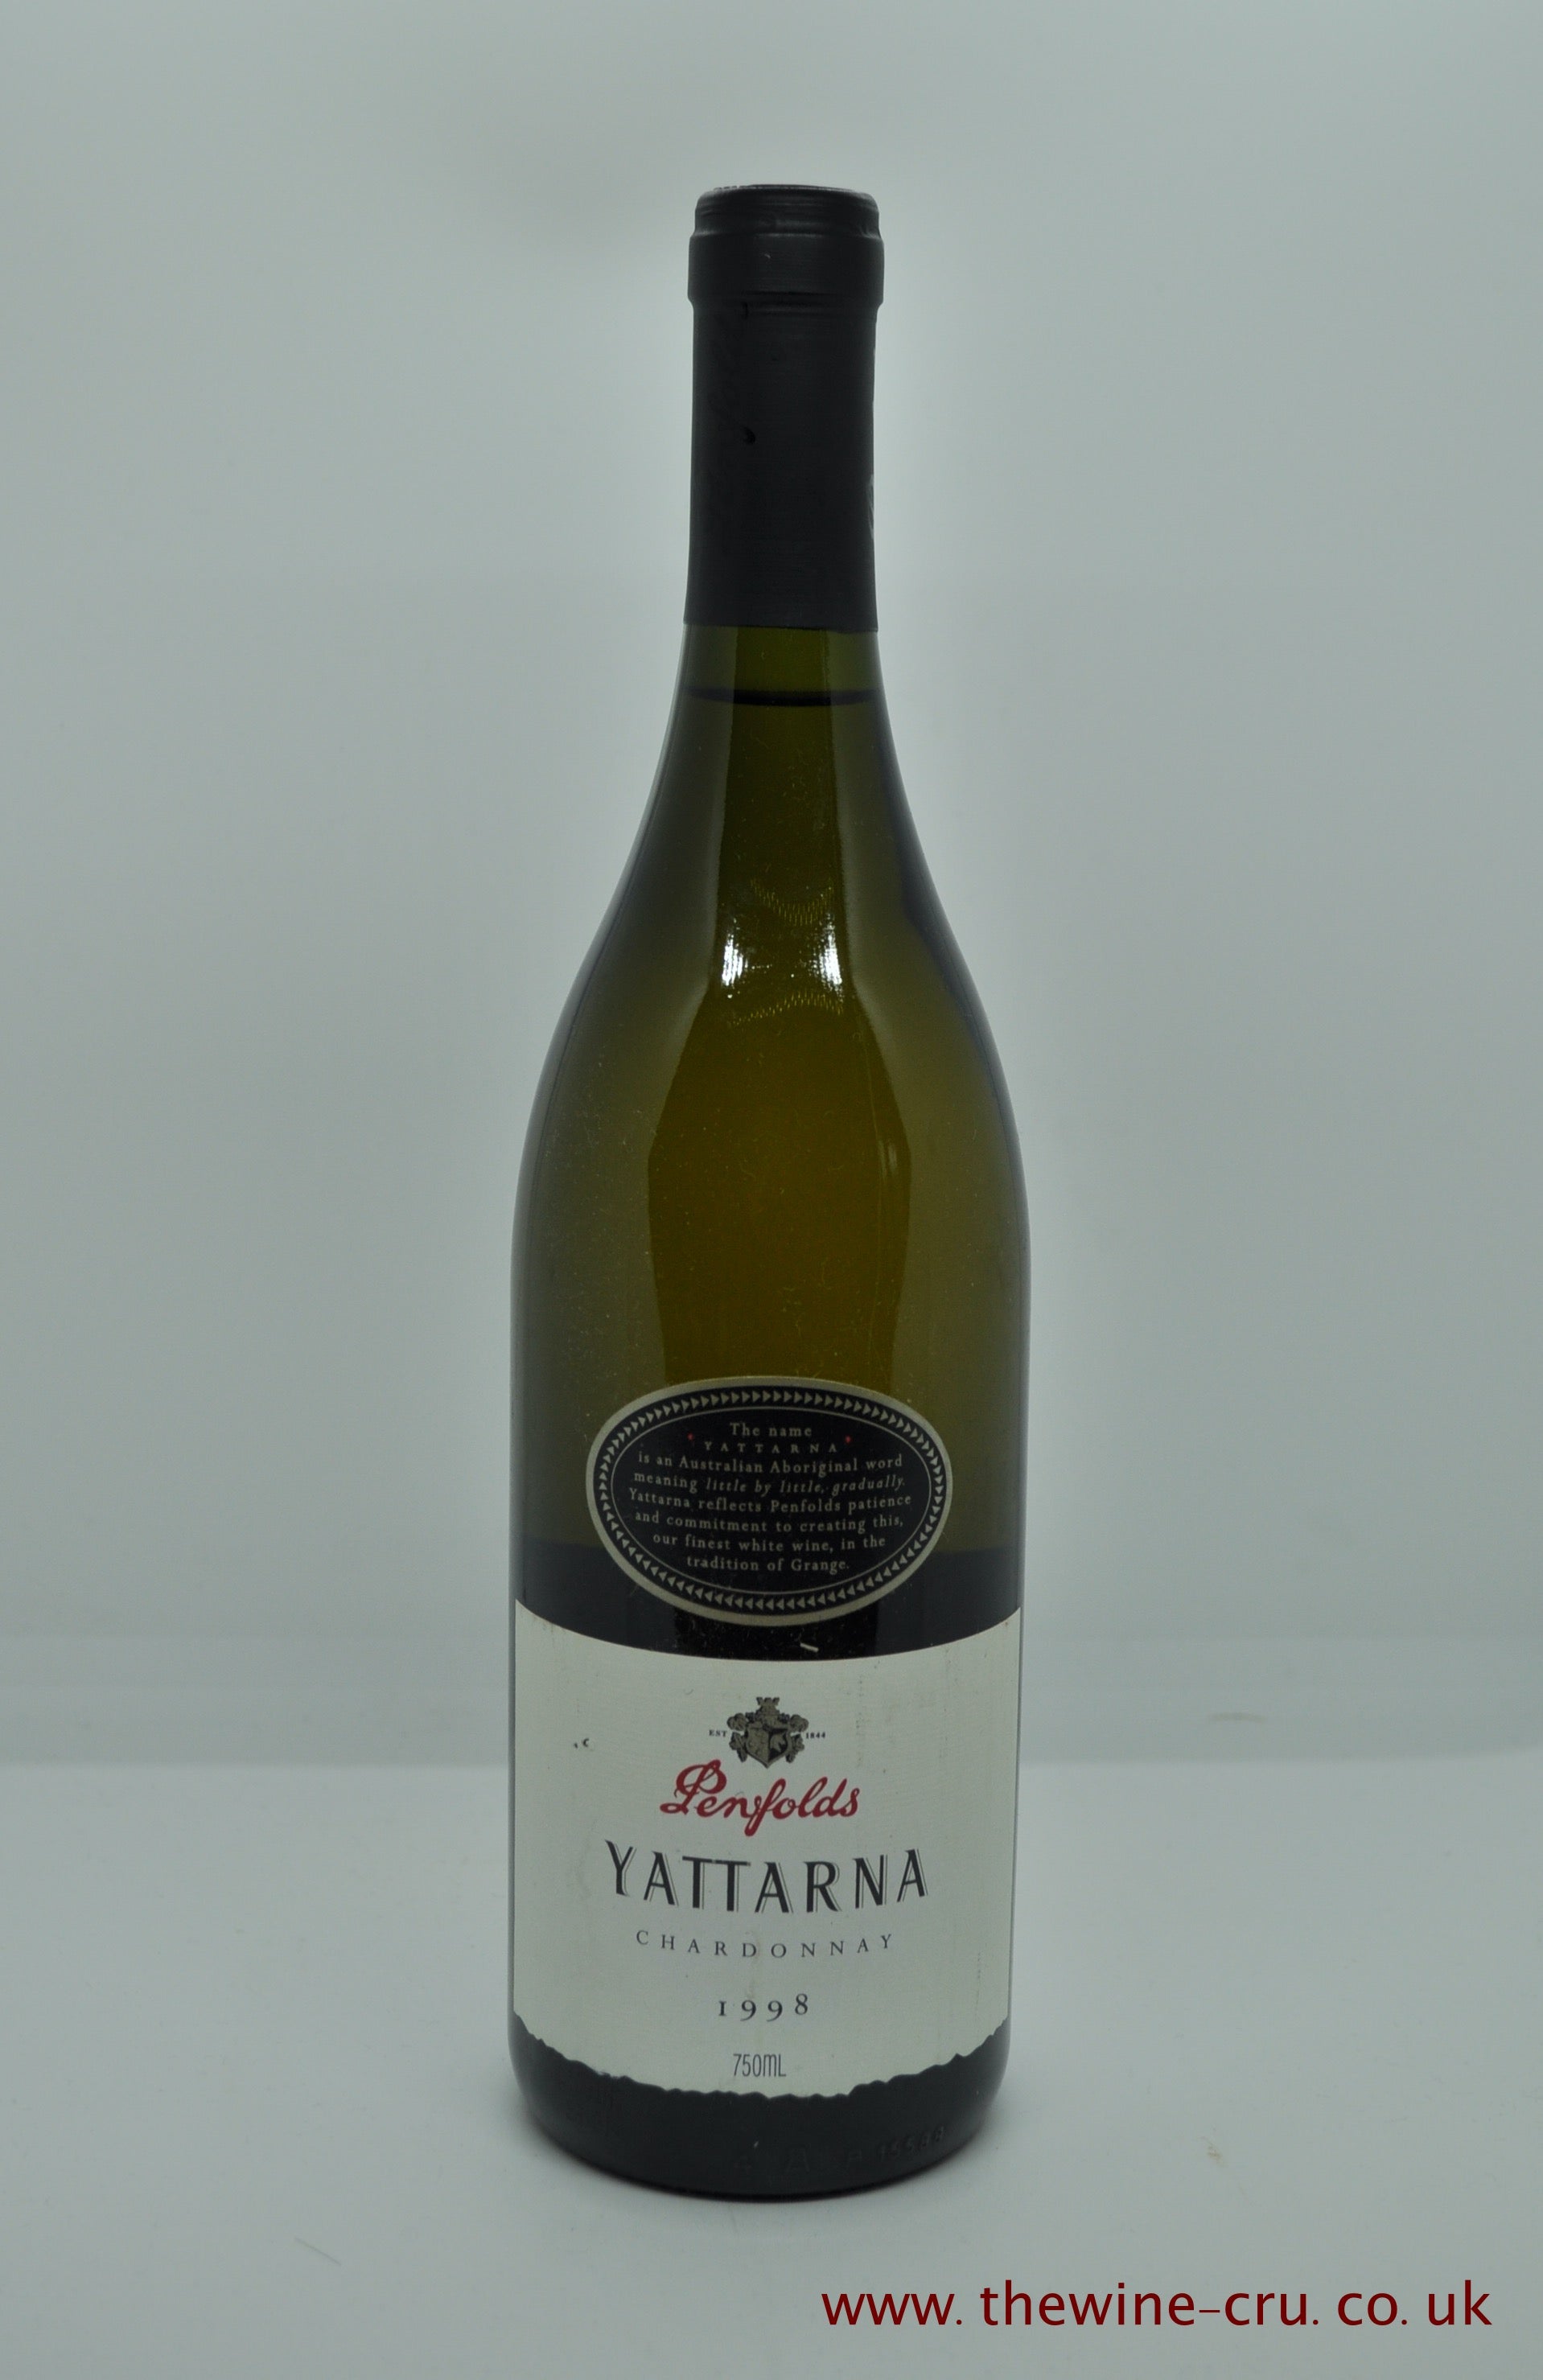 A bottle of 1998 vintage white wine. Penfold's Yattarna. Australia. The bottle is in good condition. Immediate delivery available. Free local delivery. Gift wrapping available.